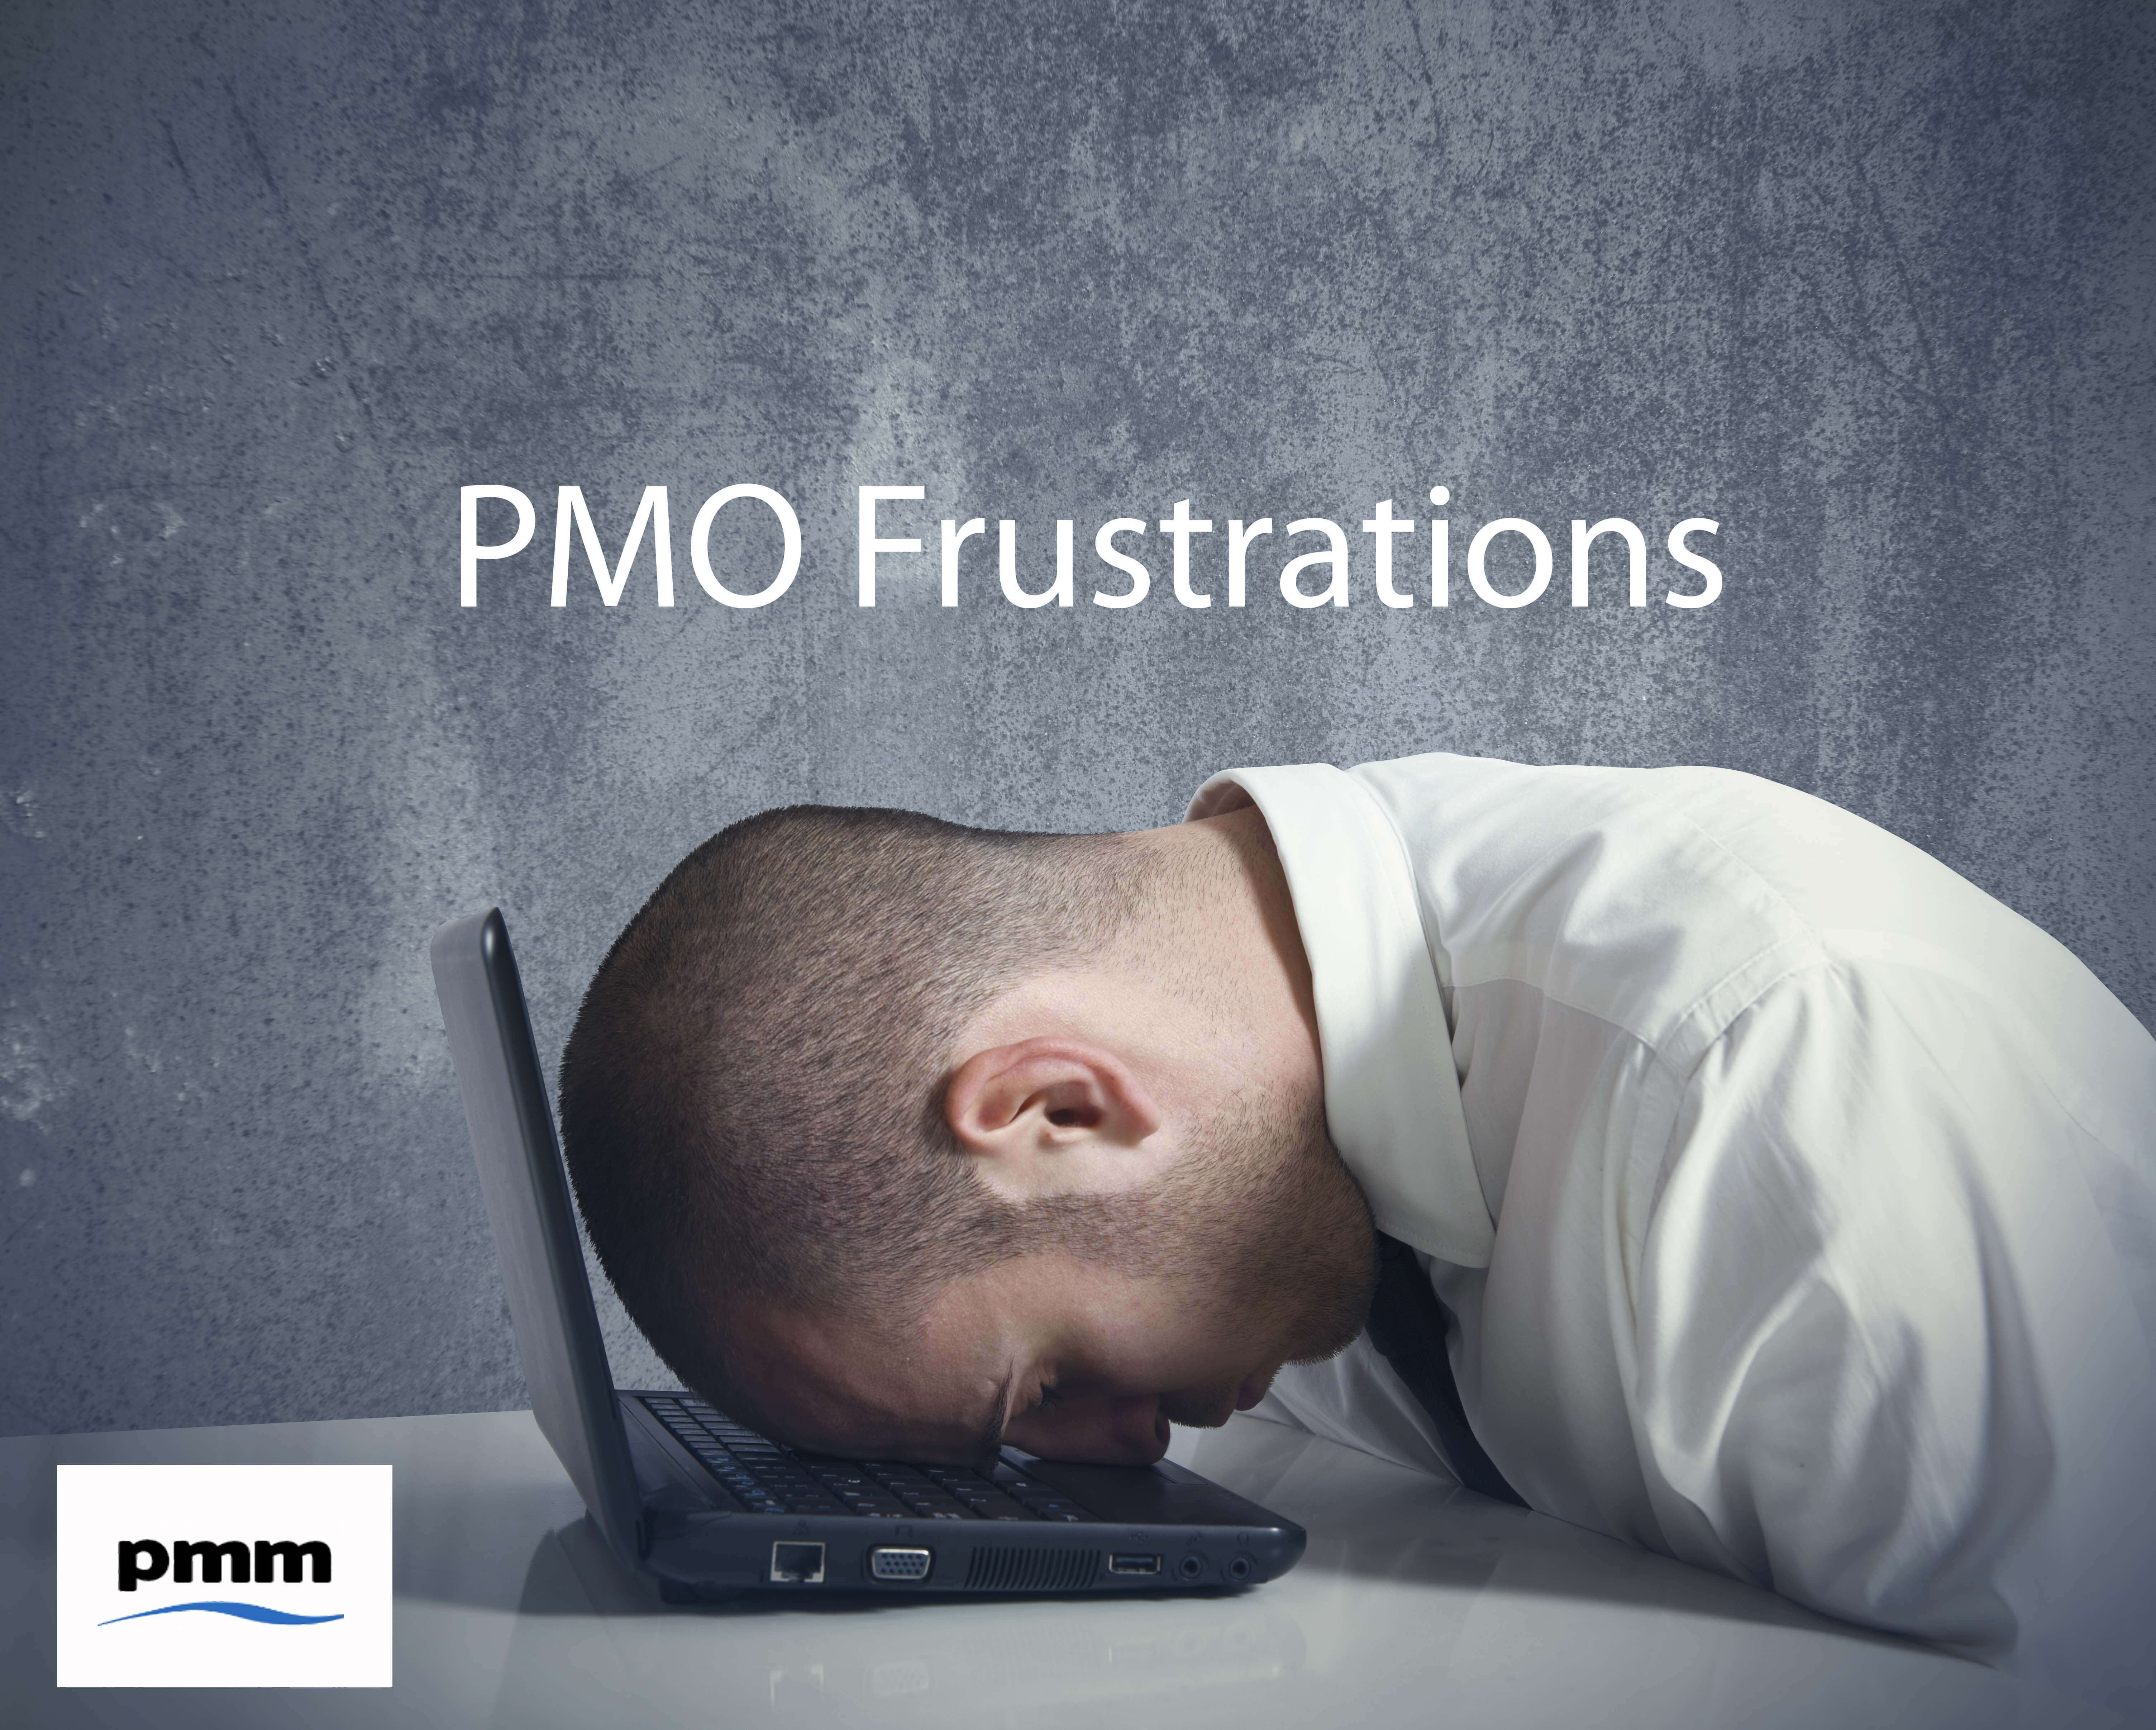 A fristrated PMO manager slumped on laptop